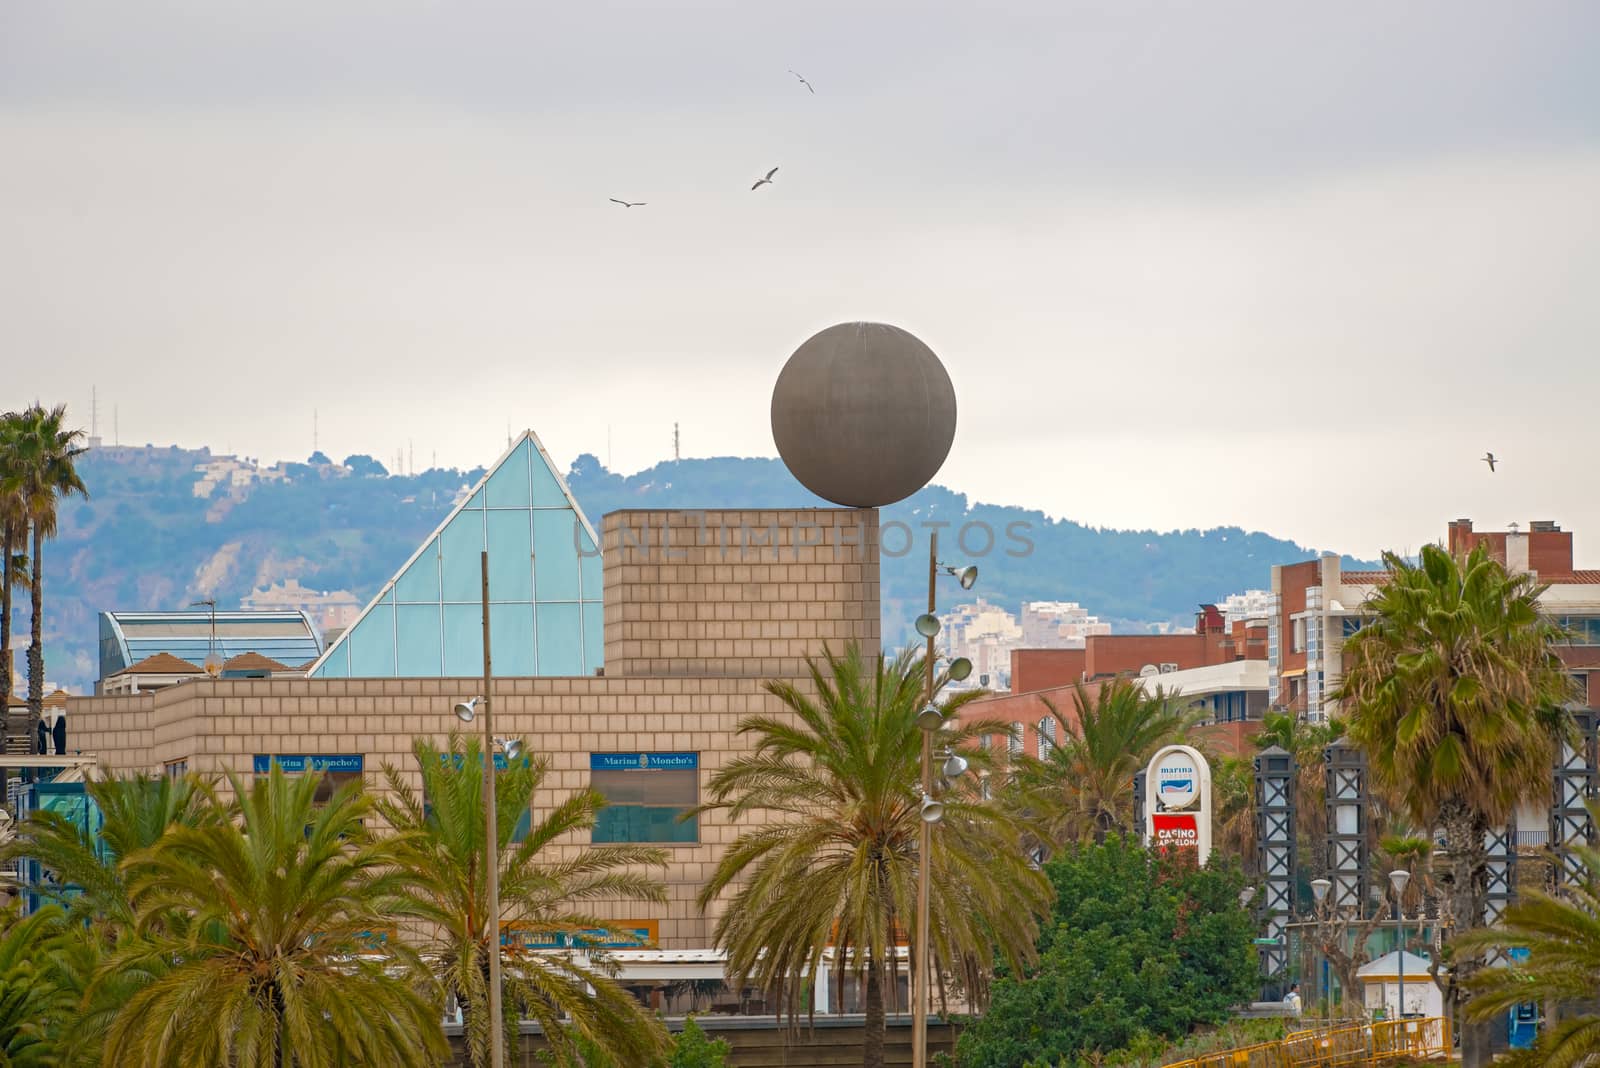  Gehry's Sphere Sculpture, Barcelona, Spain  by Marcus